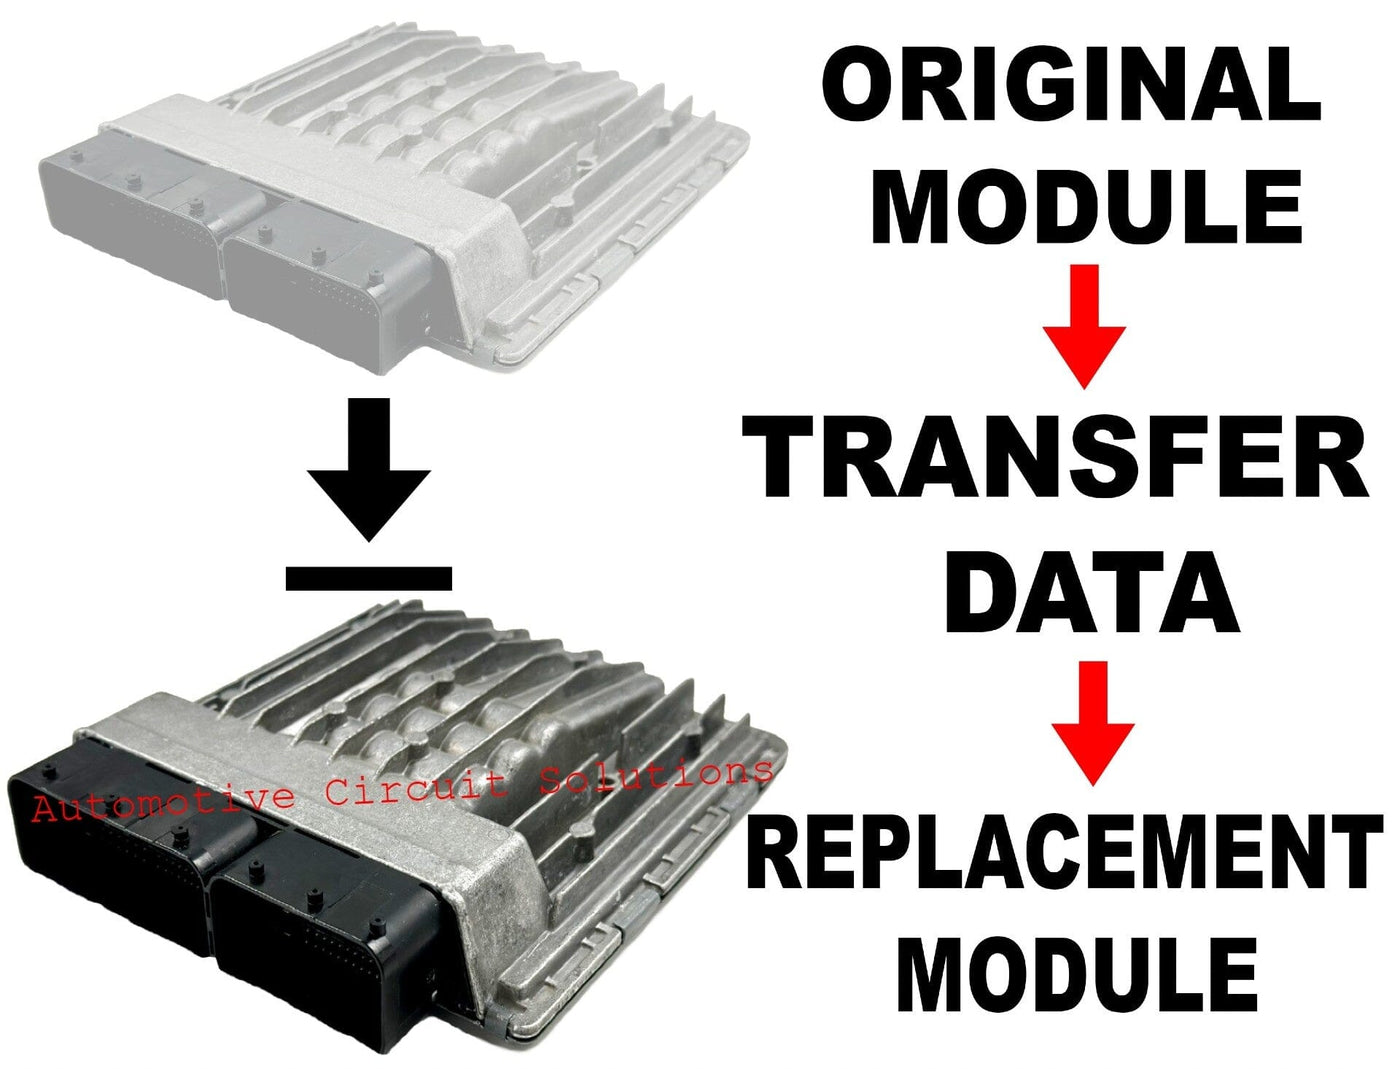 BMW DME Module Repair - CLONING SERVICE (Transfer Data) Cloning Service Automotive Circuit Solutions 